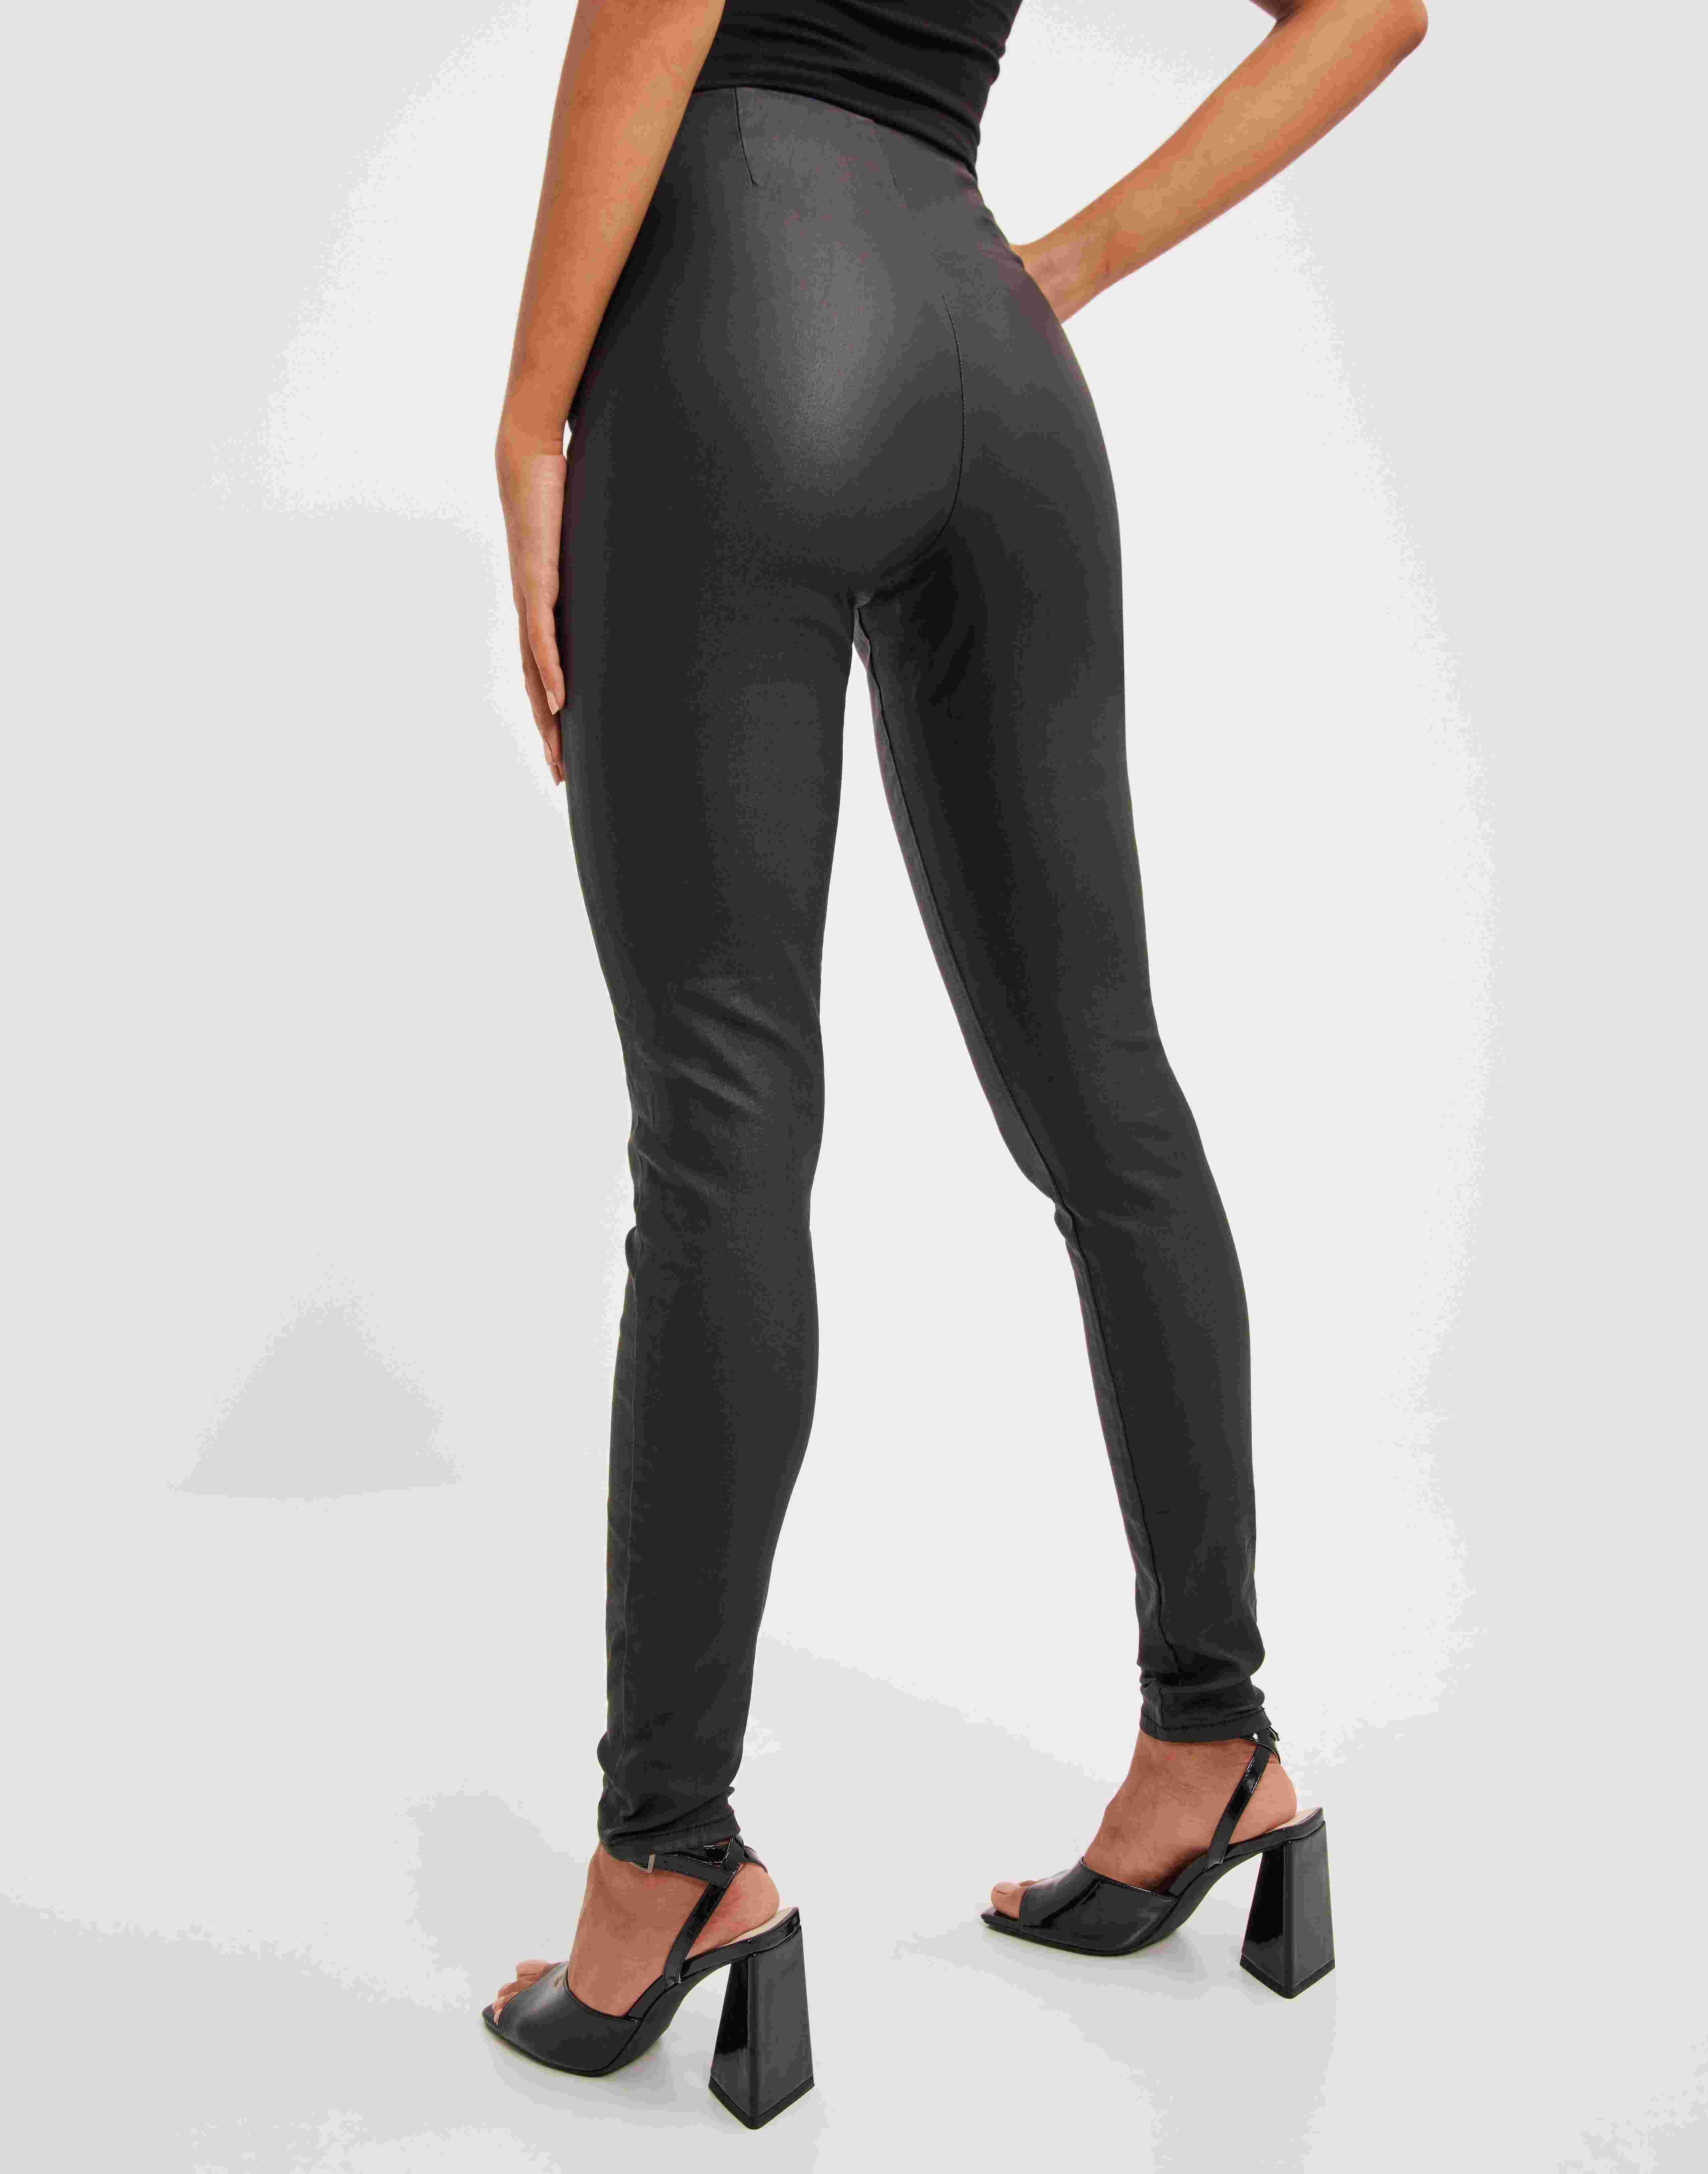 Pieces high waisted coated leggings in black